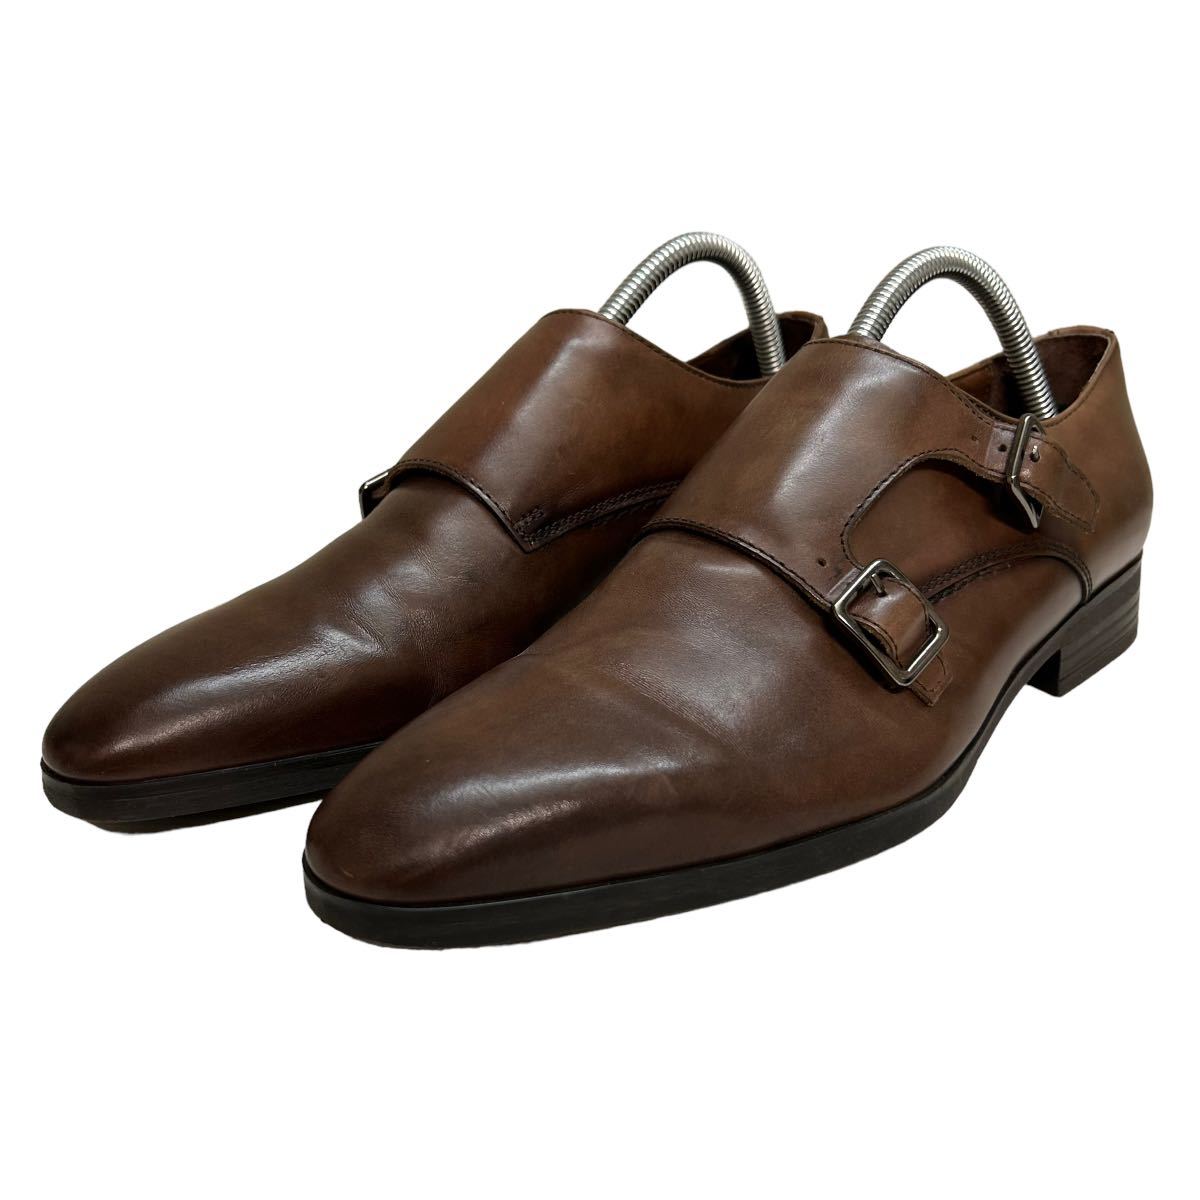 BC466 GIANCARLO MORELLI Jean karuromo rely plain tu double monk strap business shoes 41 approximately 26cm Brown leather 